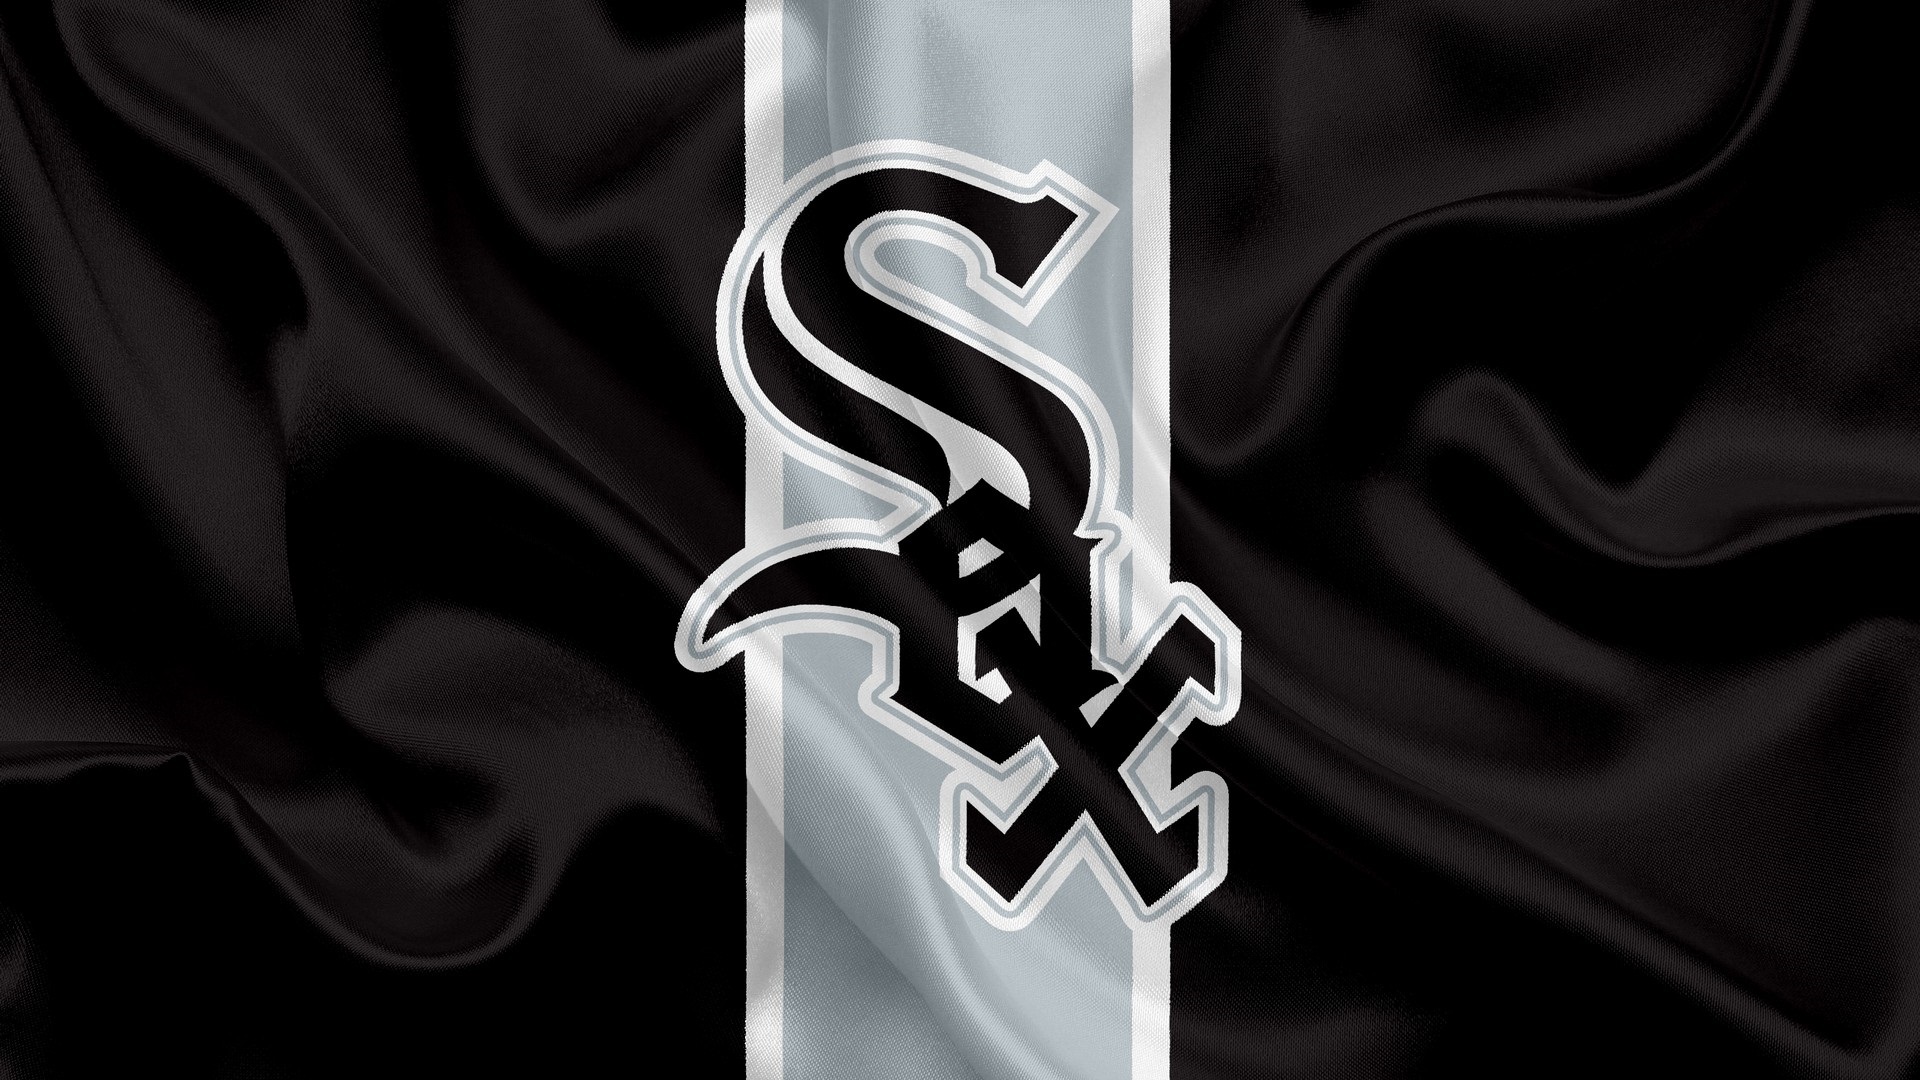 Wallpaper Desktop Chicago White Sox HD With high-resolution 1920X1080 pixel. You can use this wallpaper for Mac Desktop Wallpaper, Laptop Screensavers, Android Wallpapers, Tablet or iPhone Home Screen and another mobile phone device